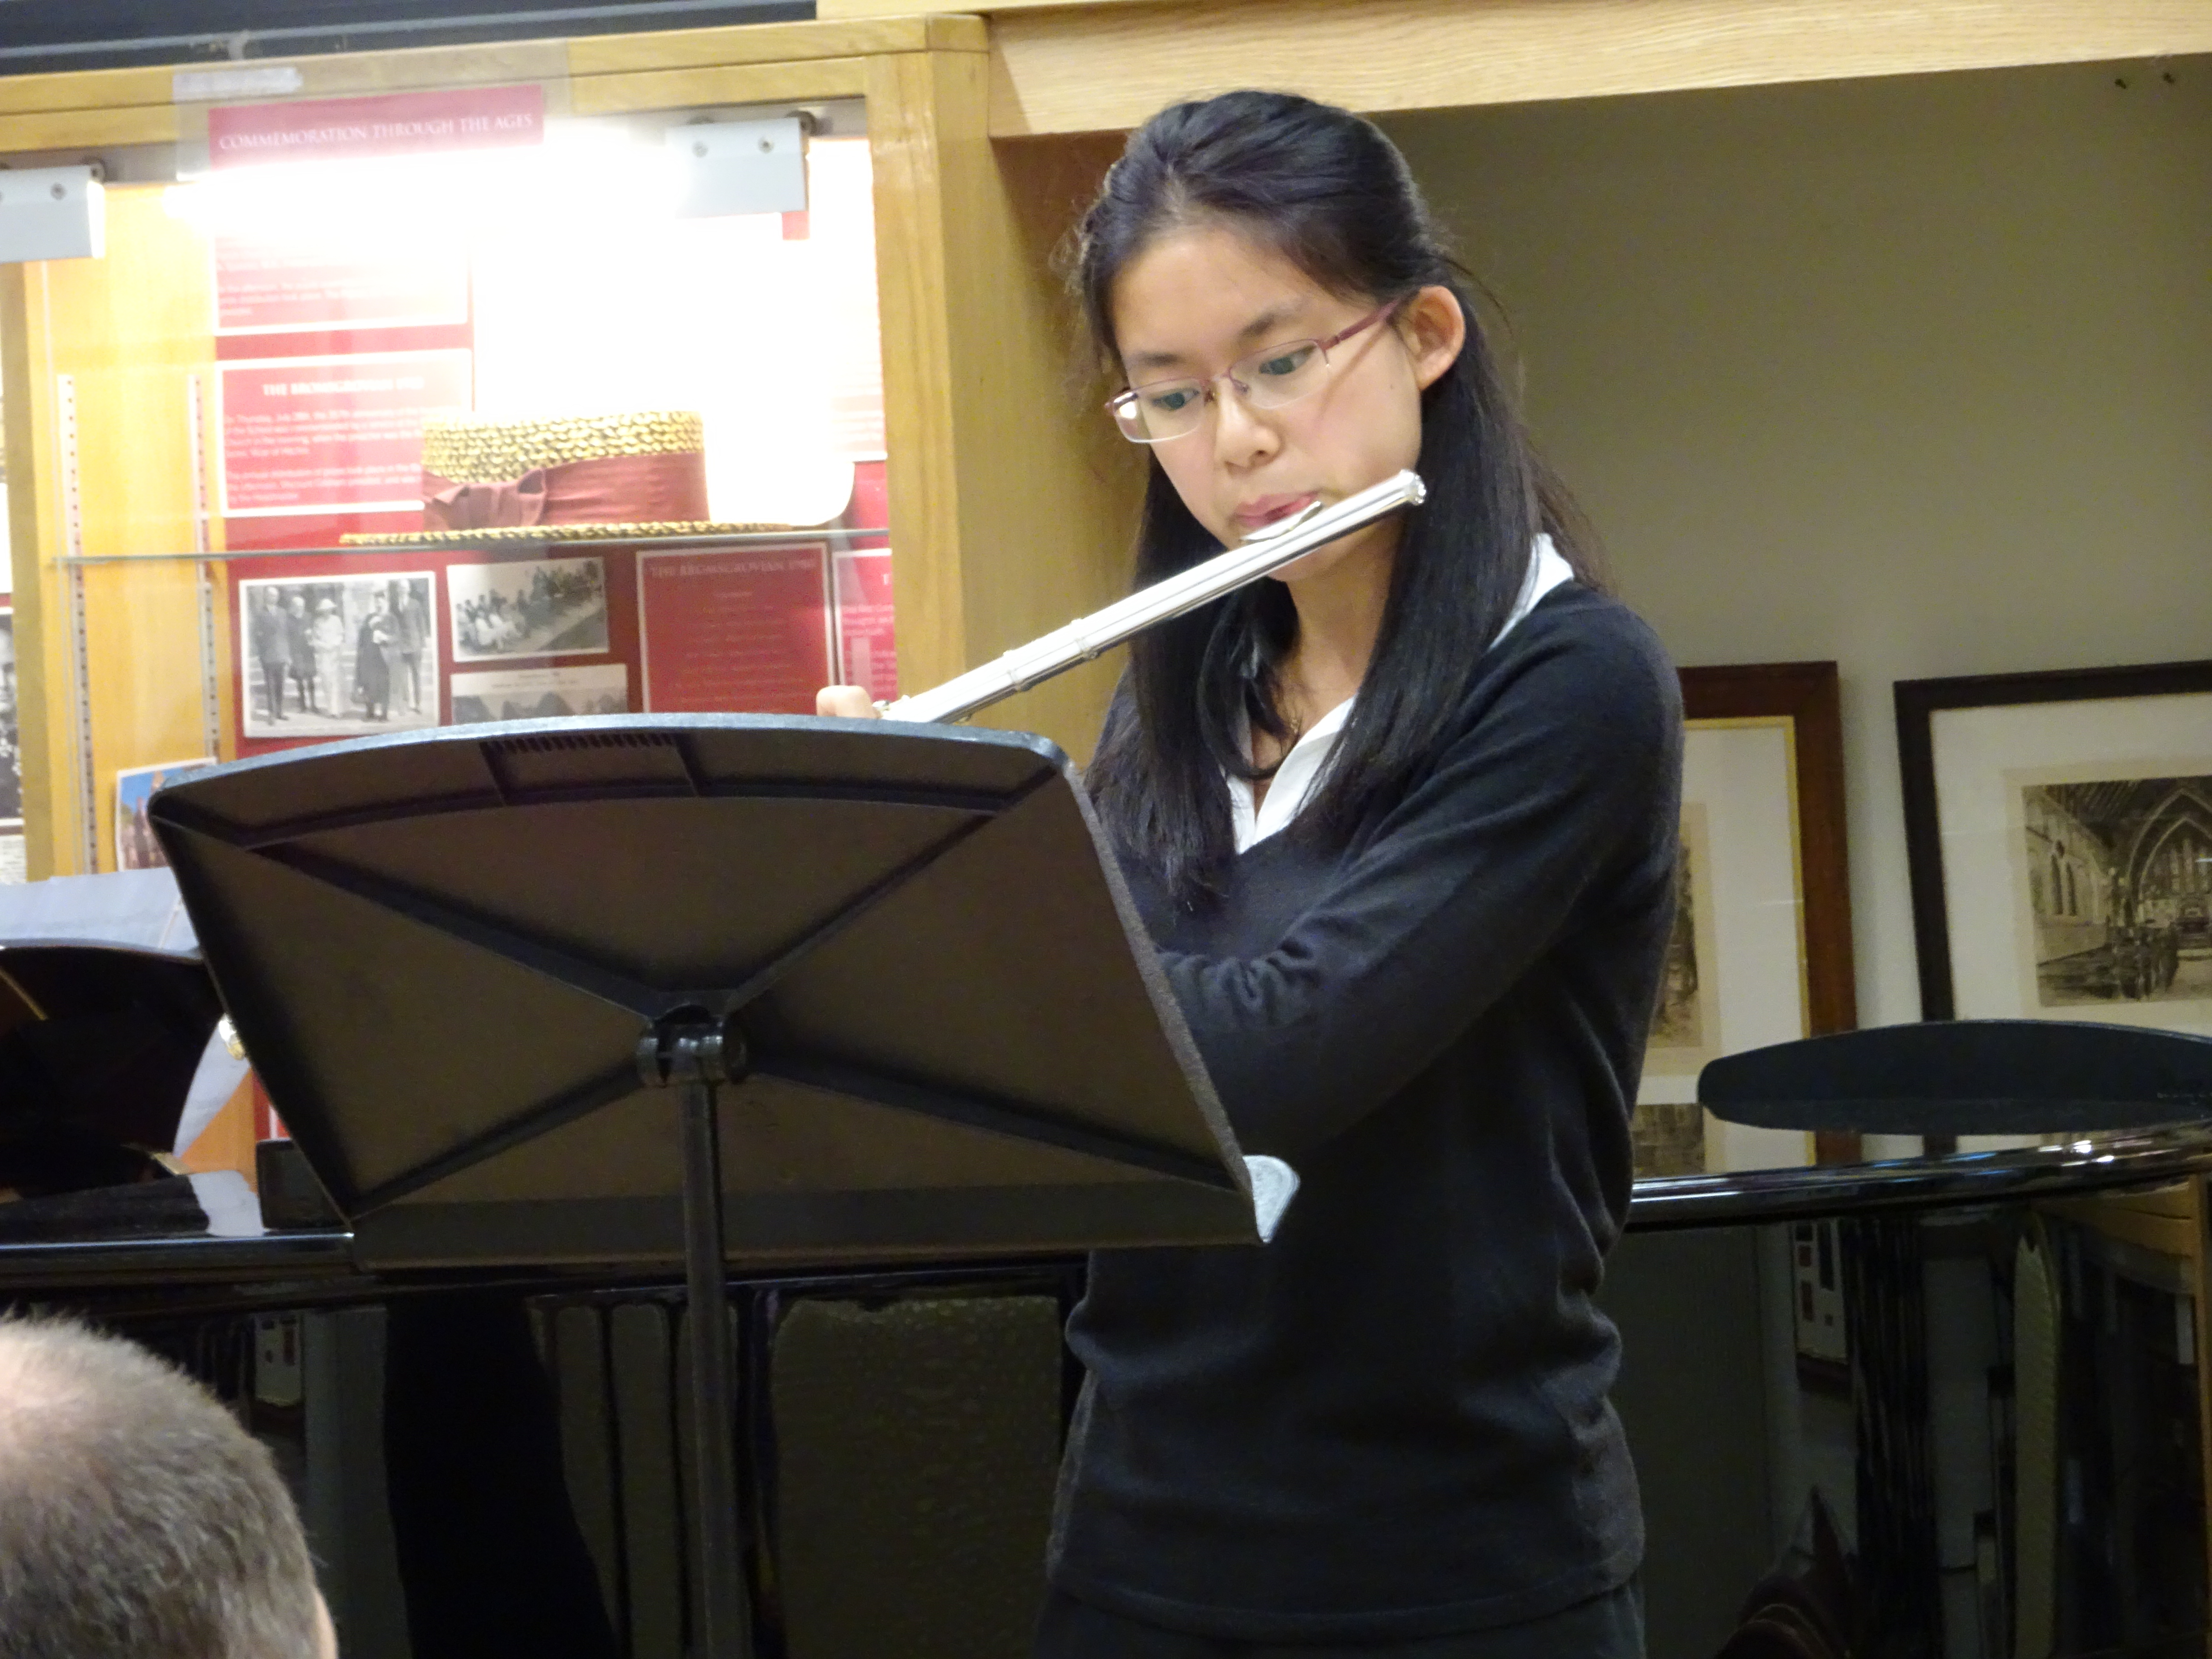 Early Evening Concert, 8th October 2015 - Tiffanie T on Flute